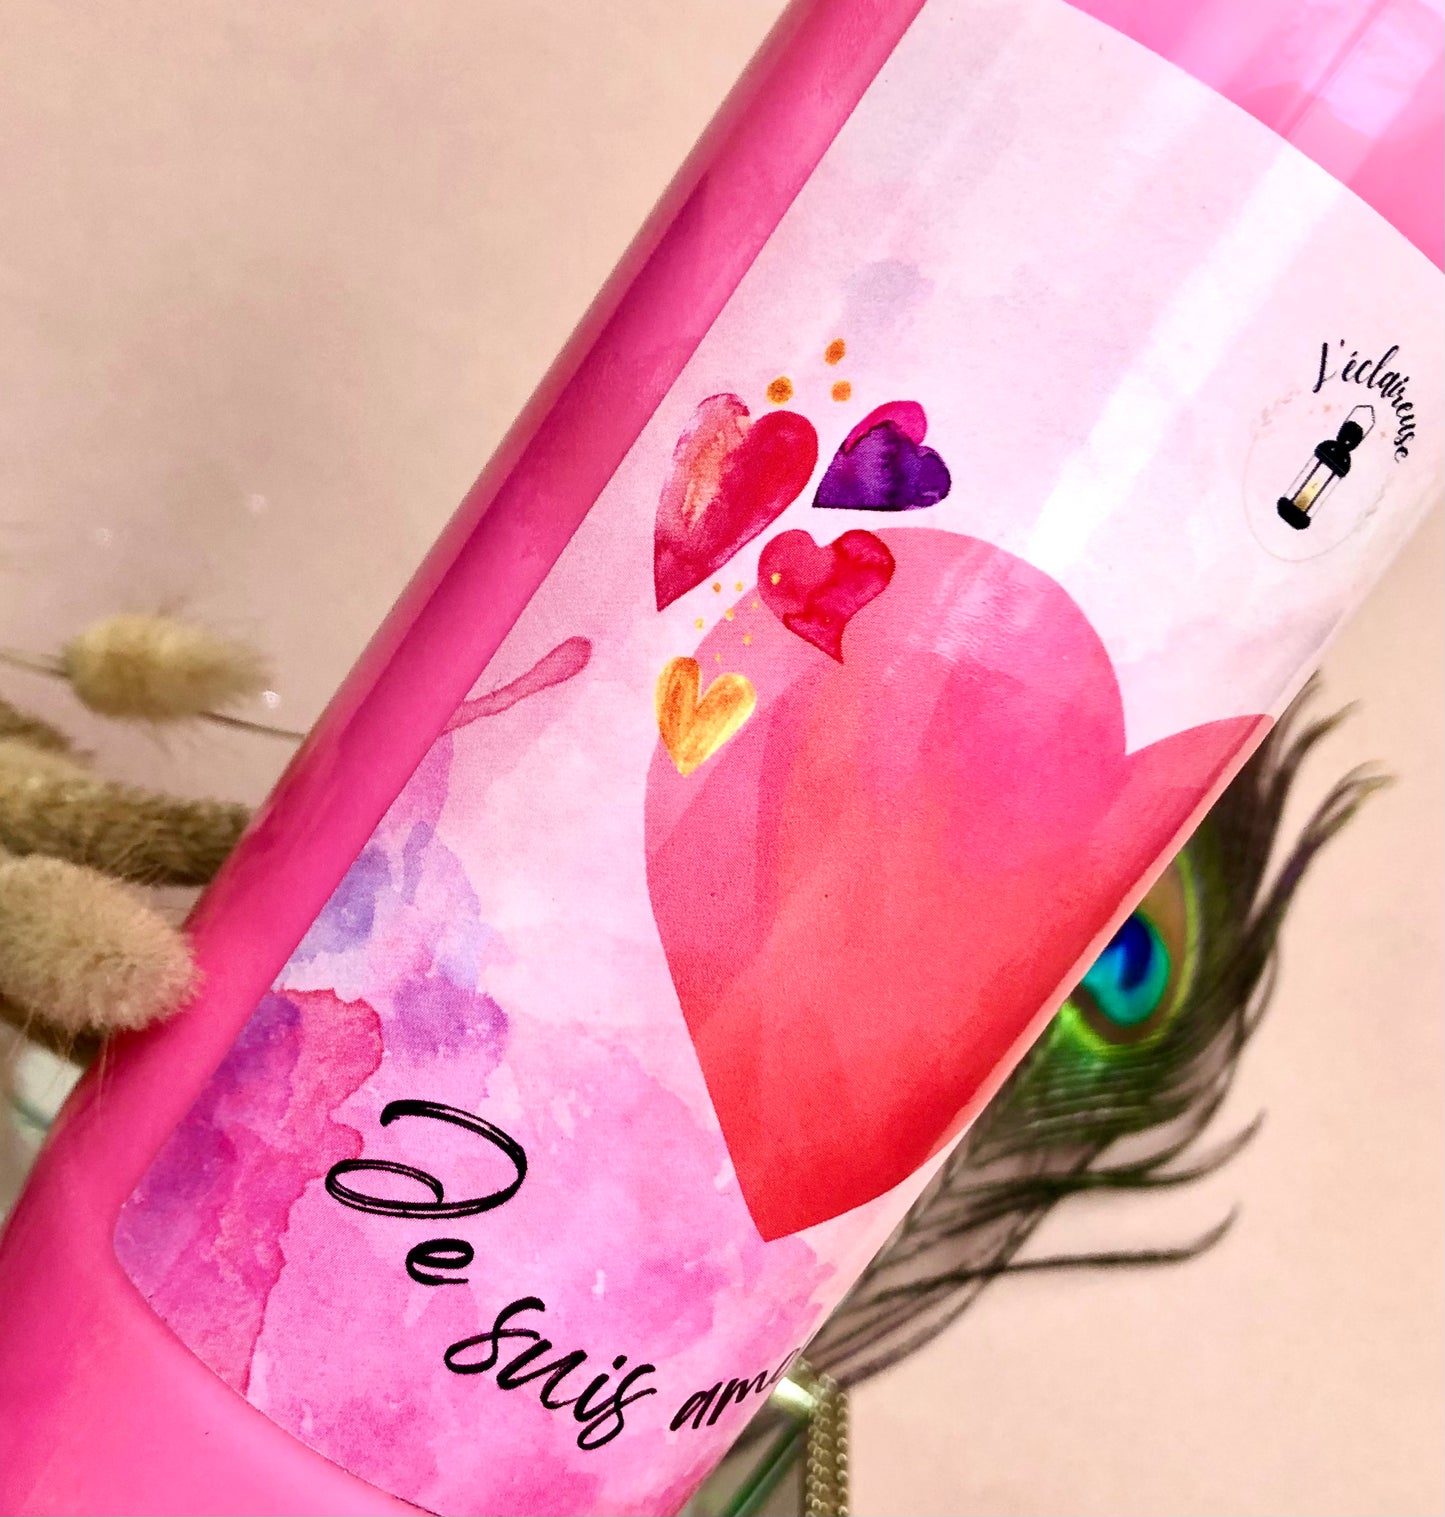 Novena candle "I am love" ~to find love~